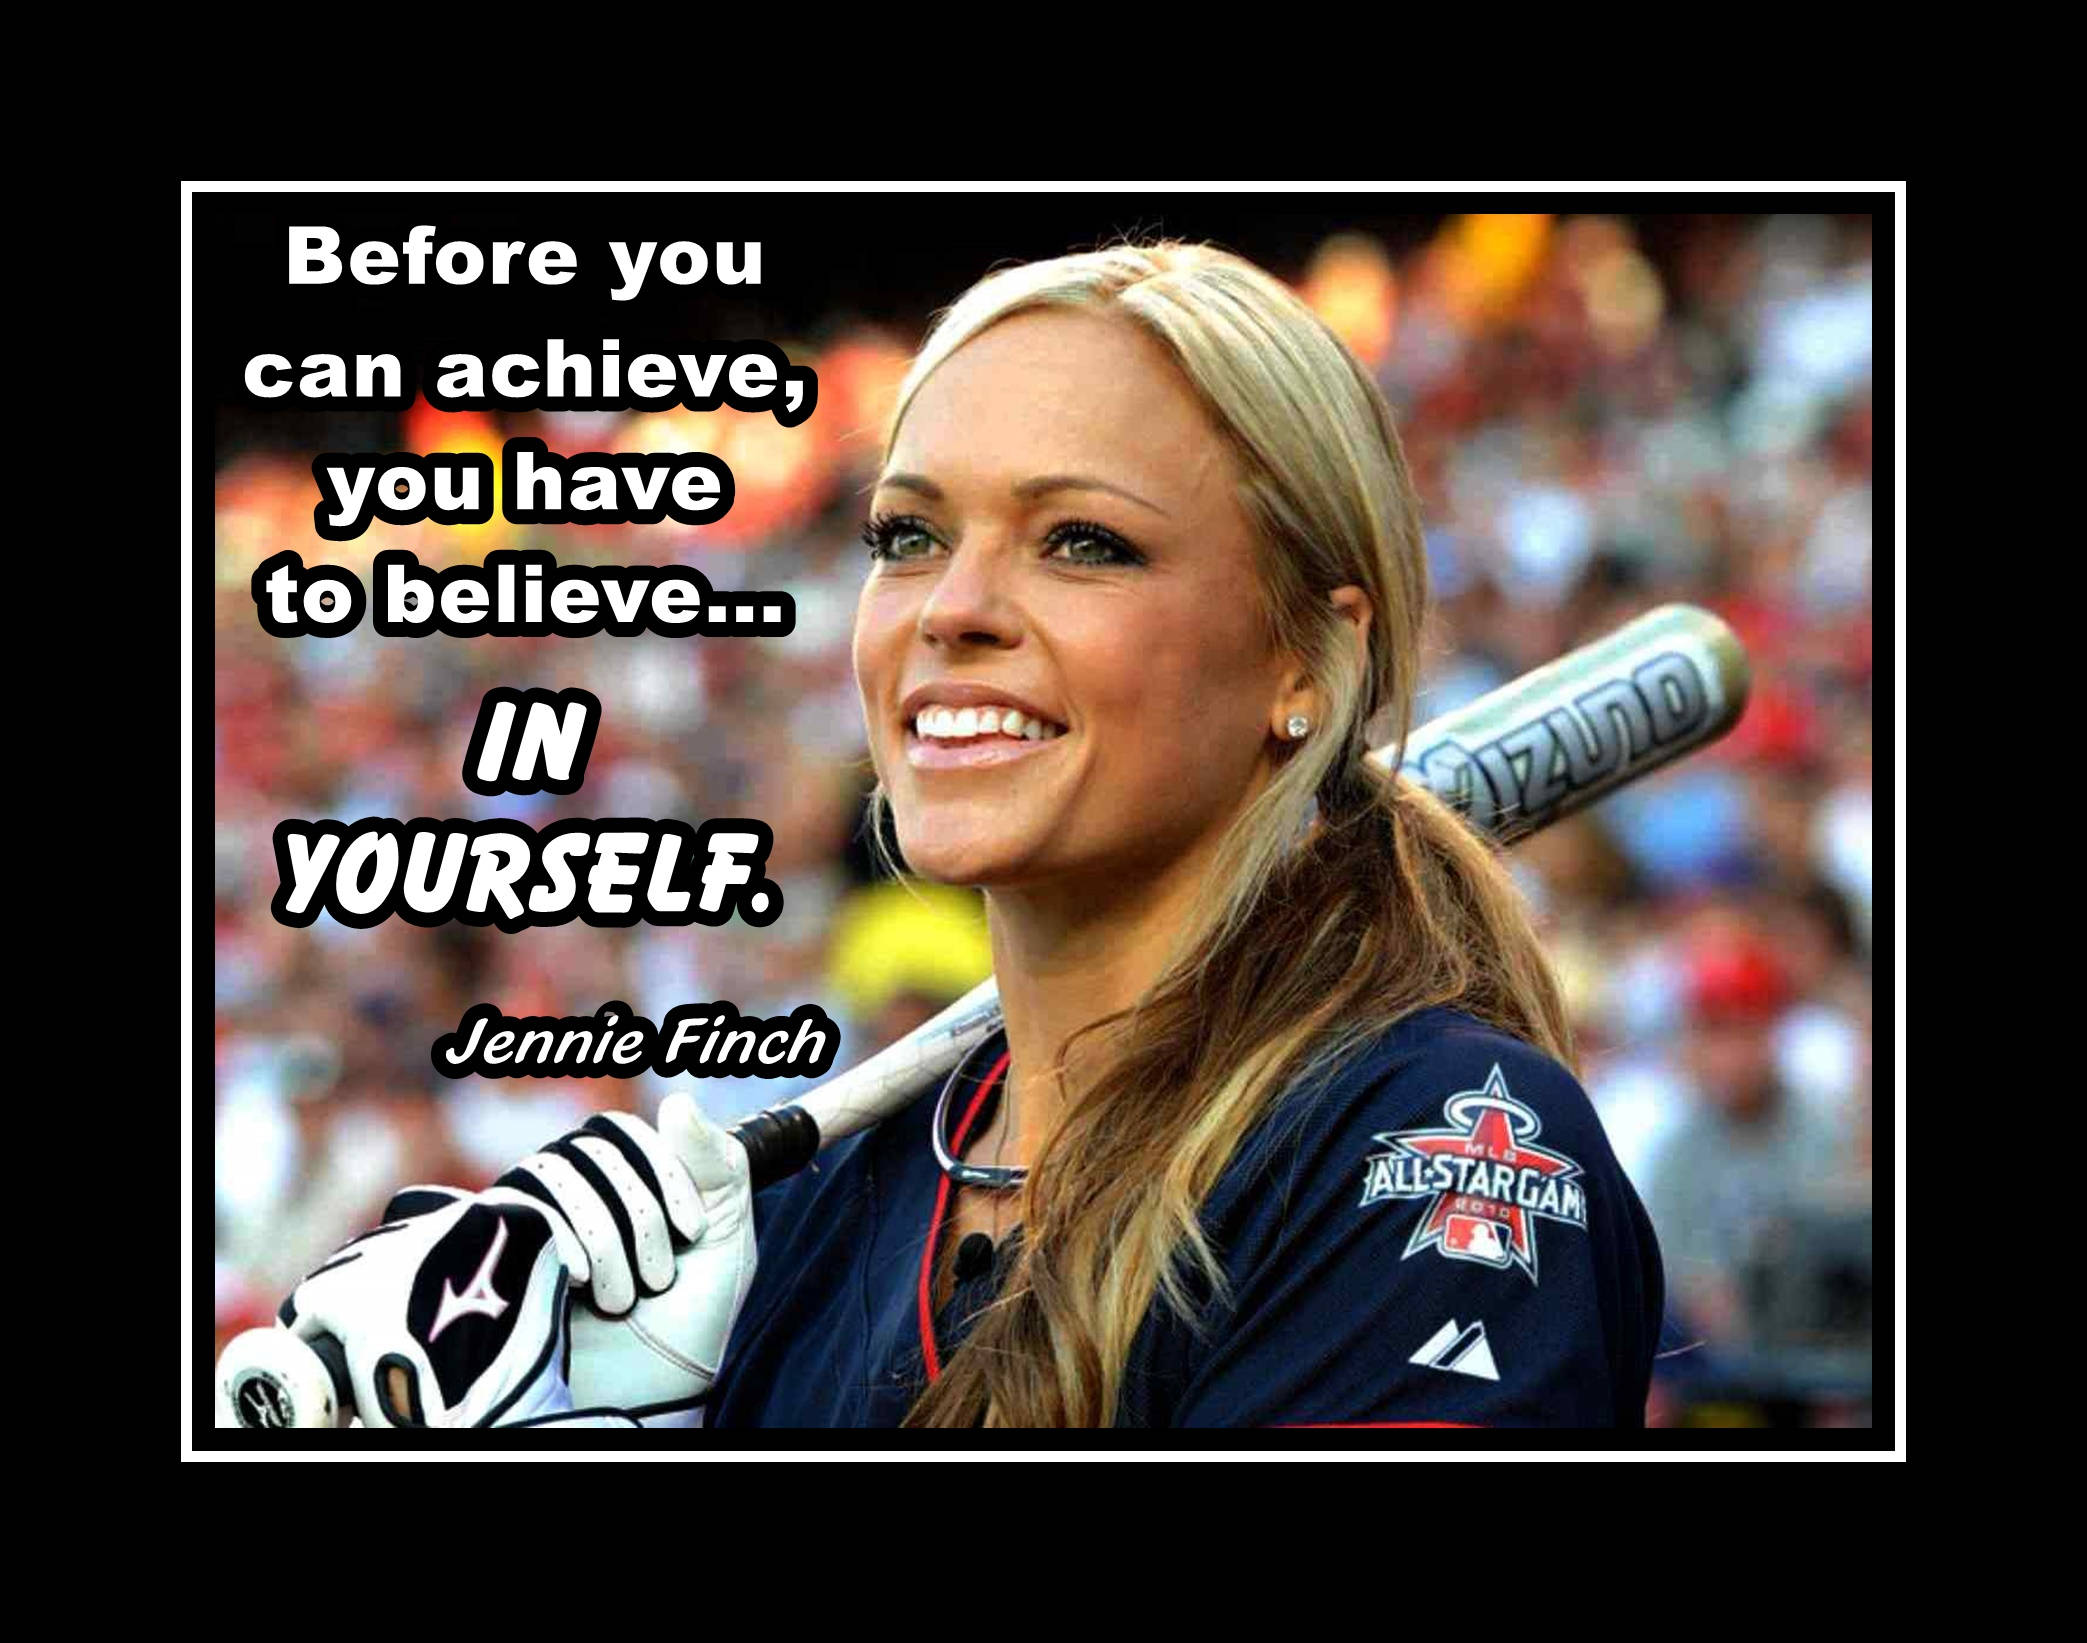 Jennie Finch 'Believe In Yourself' Quote Poster, Motivational Softball